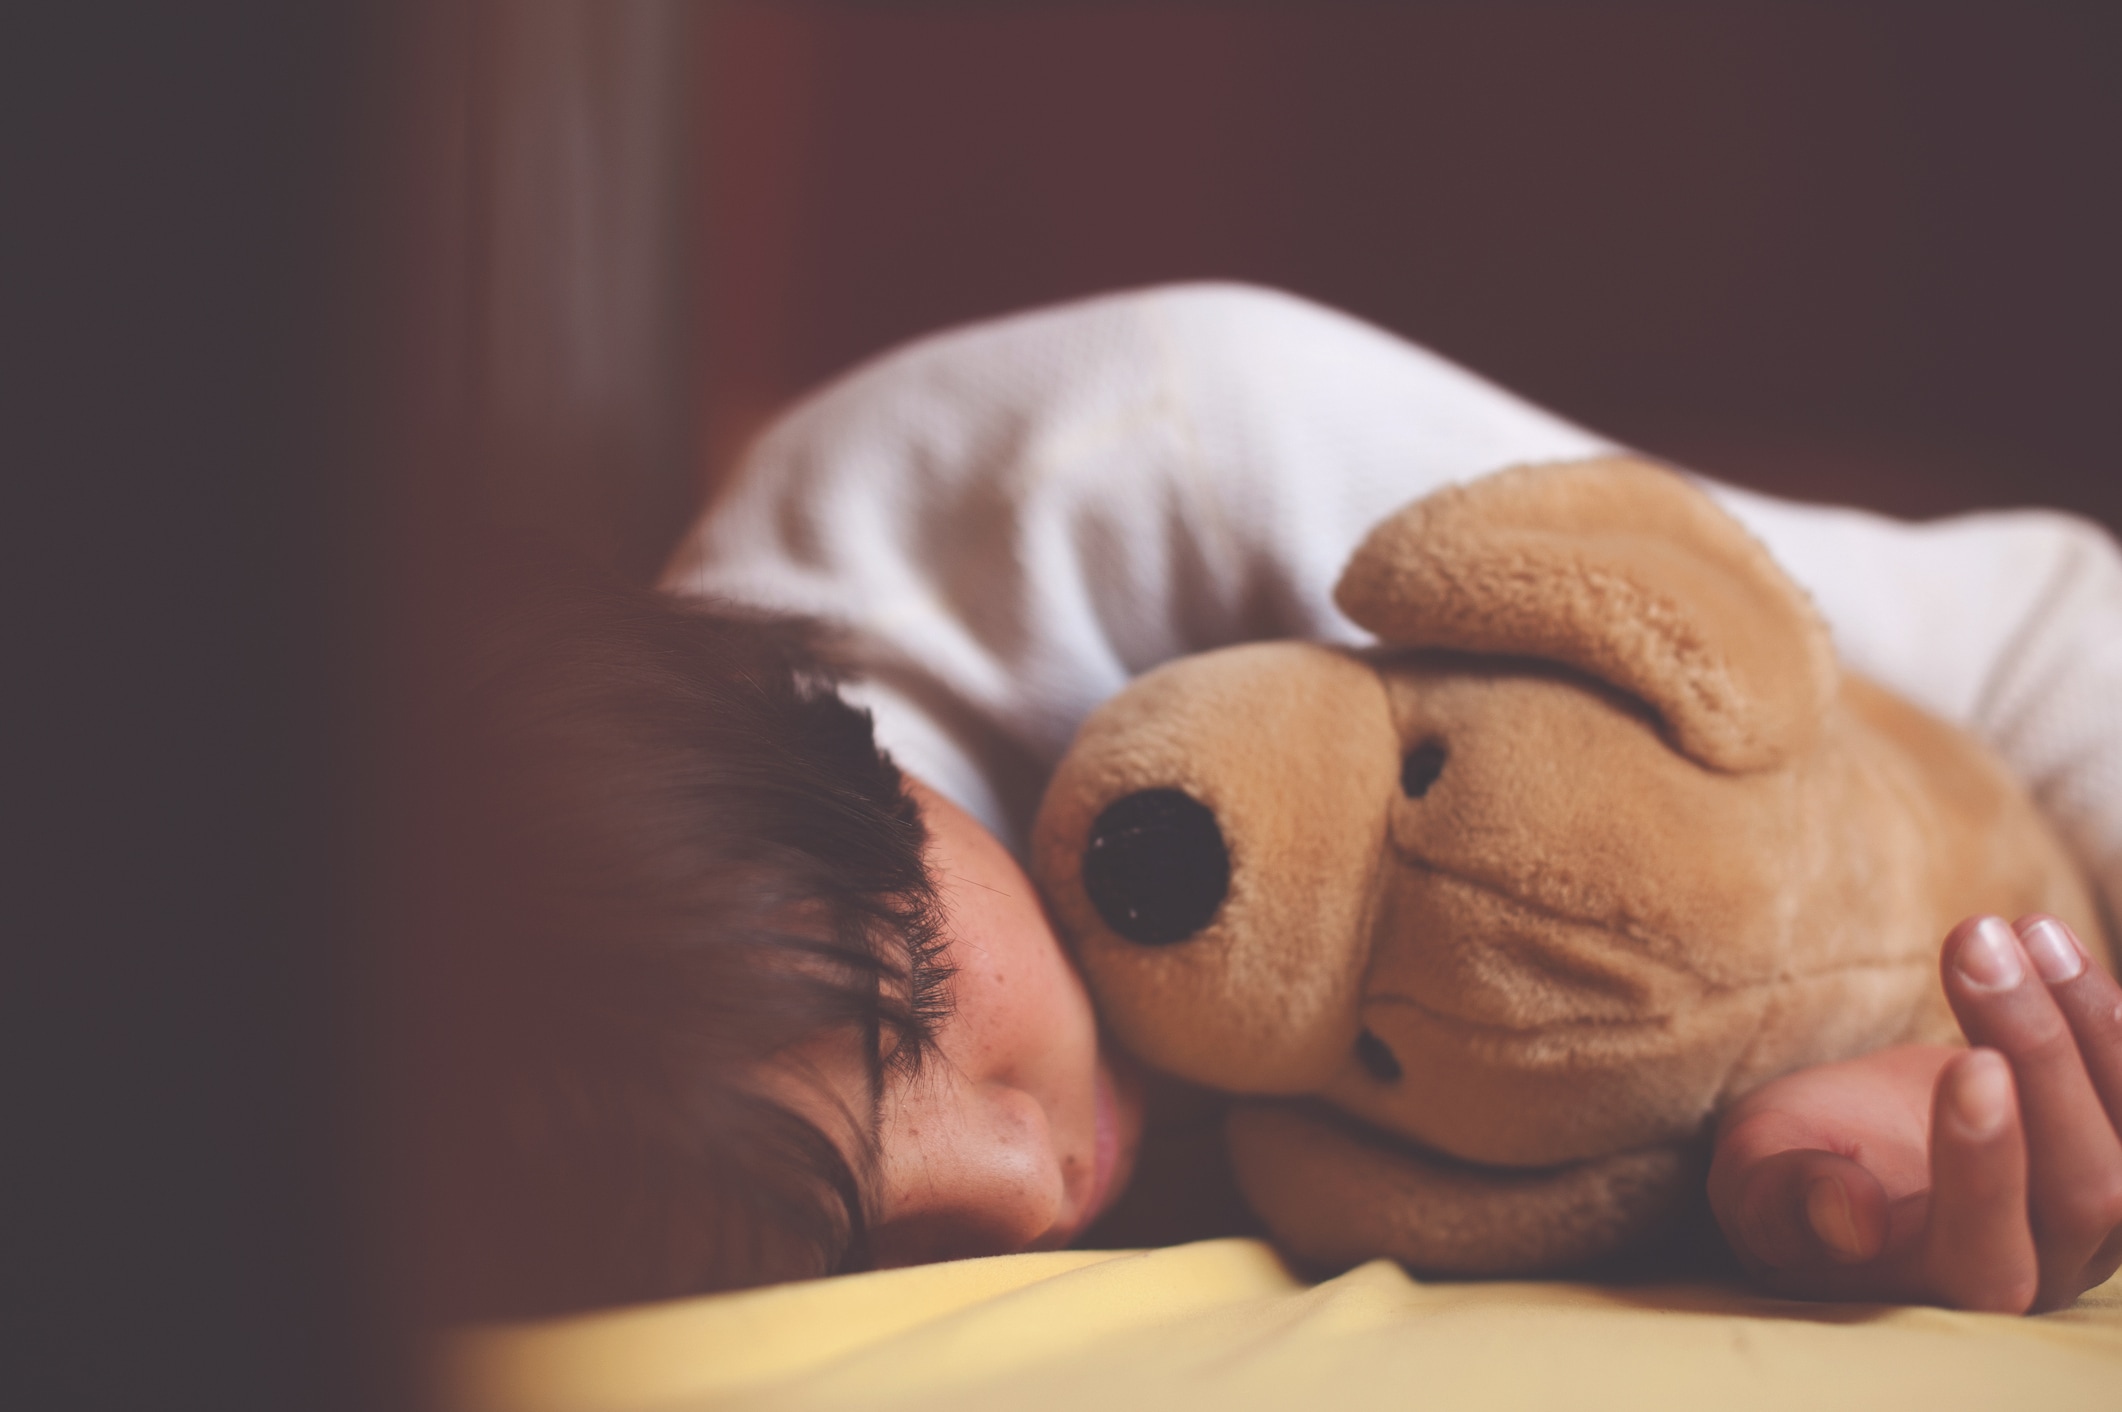 When should a child stop sleeping with stuffed animals? It's a lot